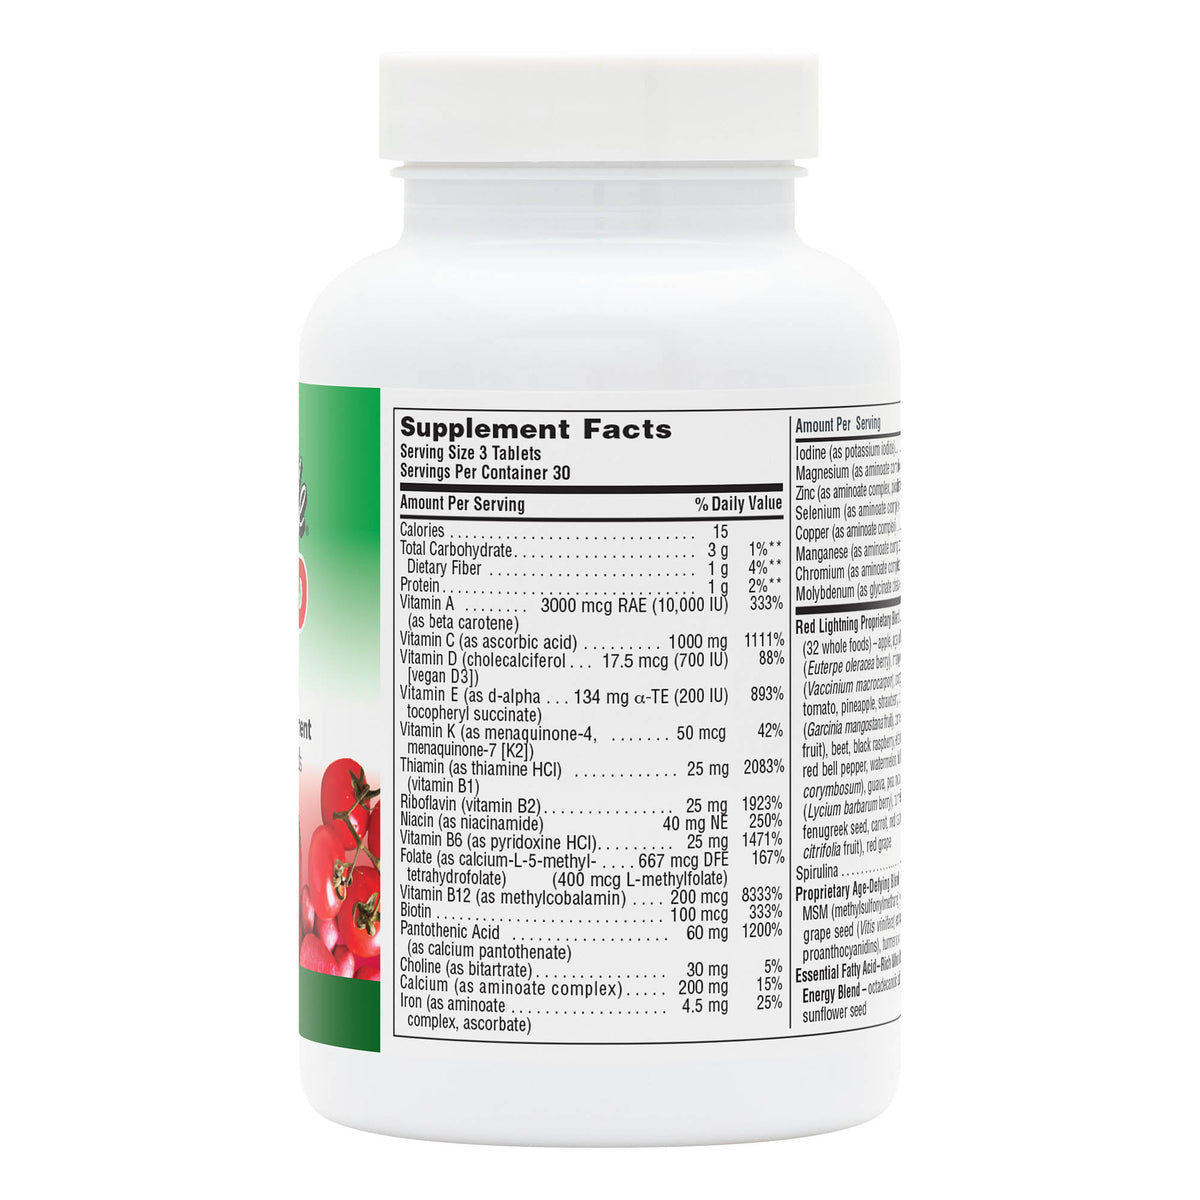 product image of Source of Life® GREEN AND RED Multivitamin Bi-Layered Tablets containing 90 Count